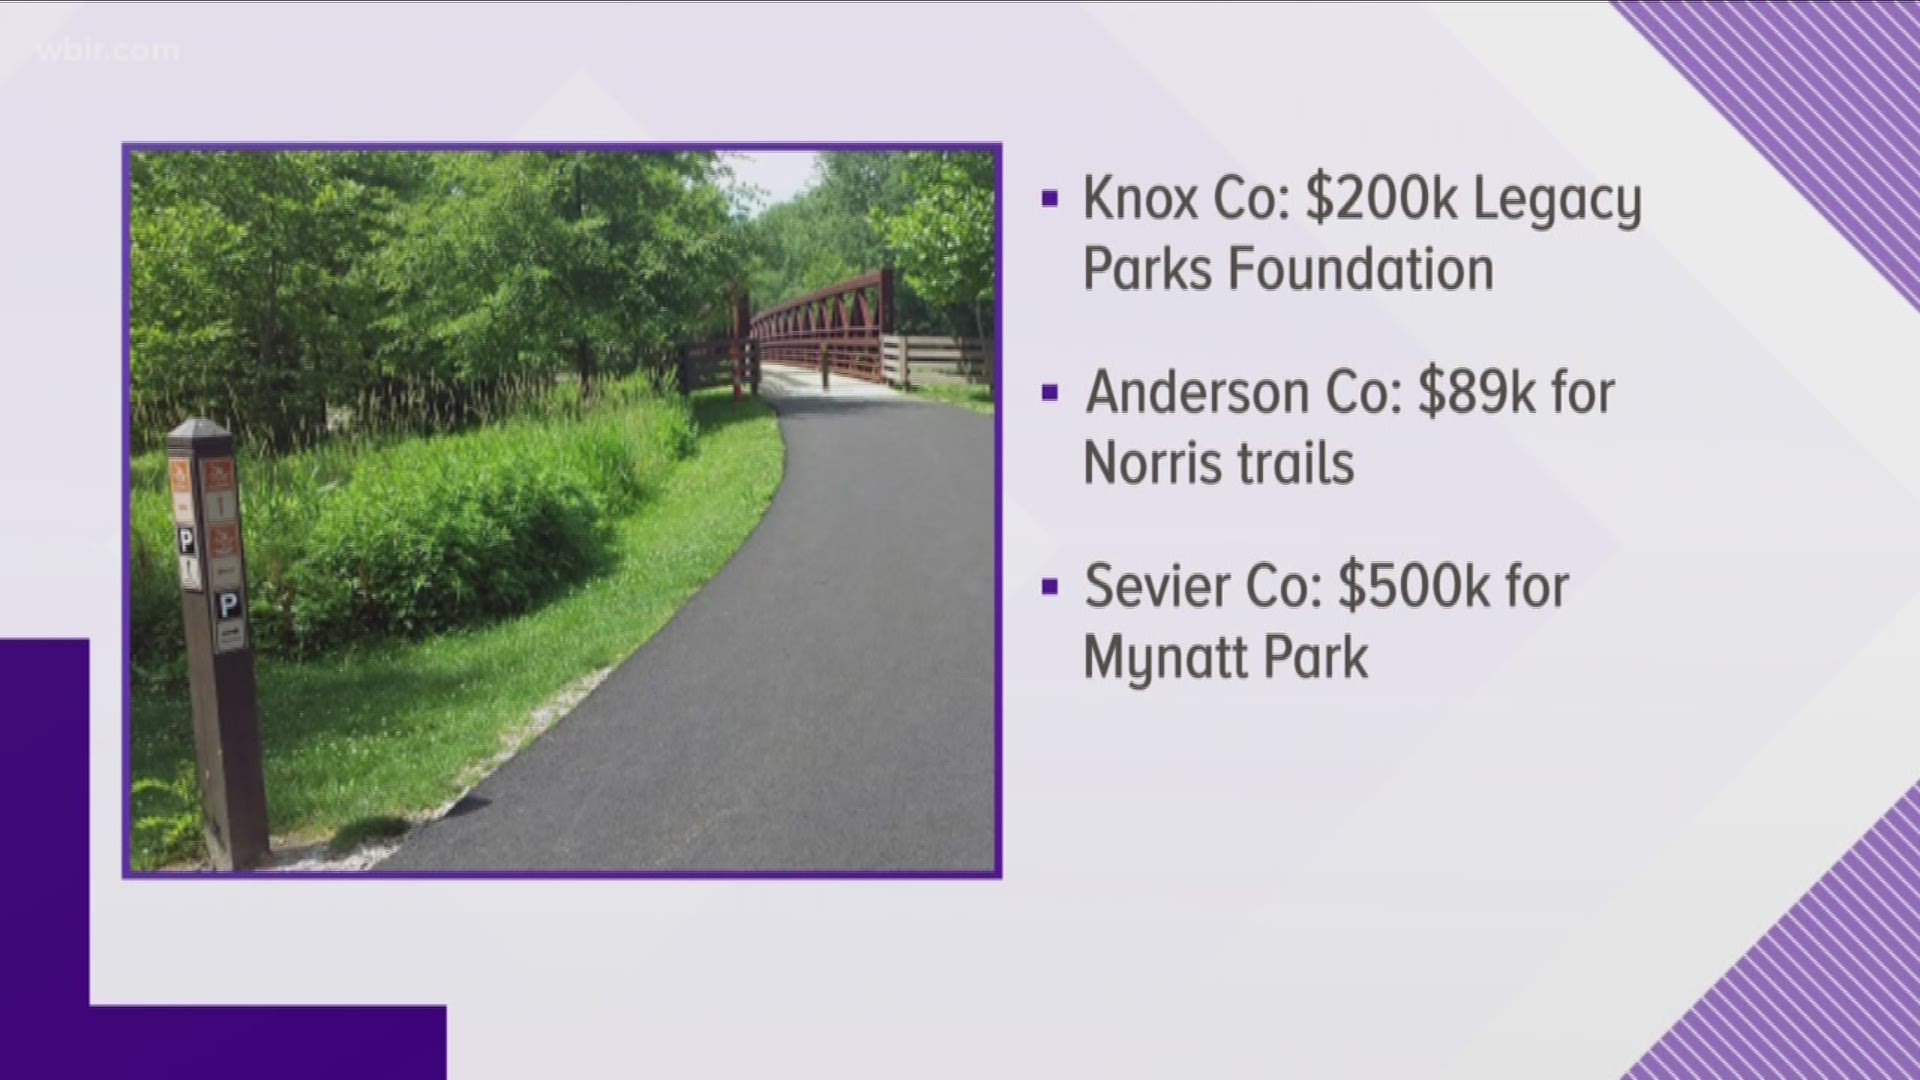 Many East Tennessee communities will receive money from the grants marked by the Tennessee Department of Environment and Conservation. Knoxville's Legacy Parks Foundation will receive $200 thousand for new trails.